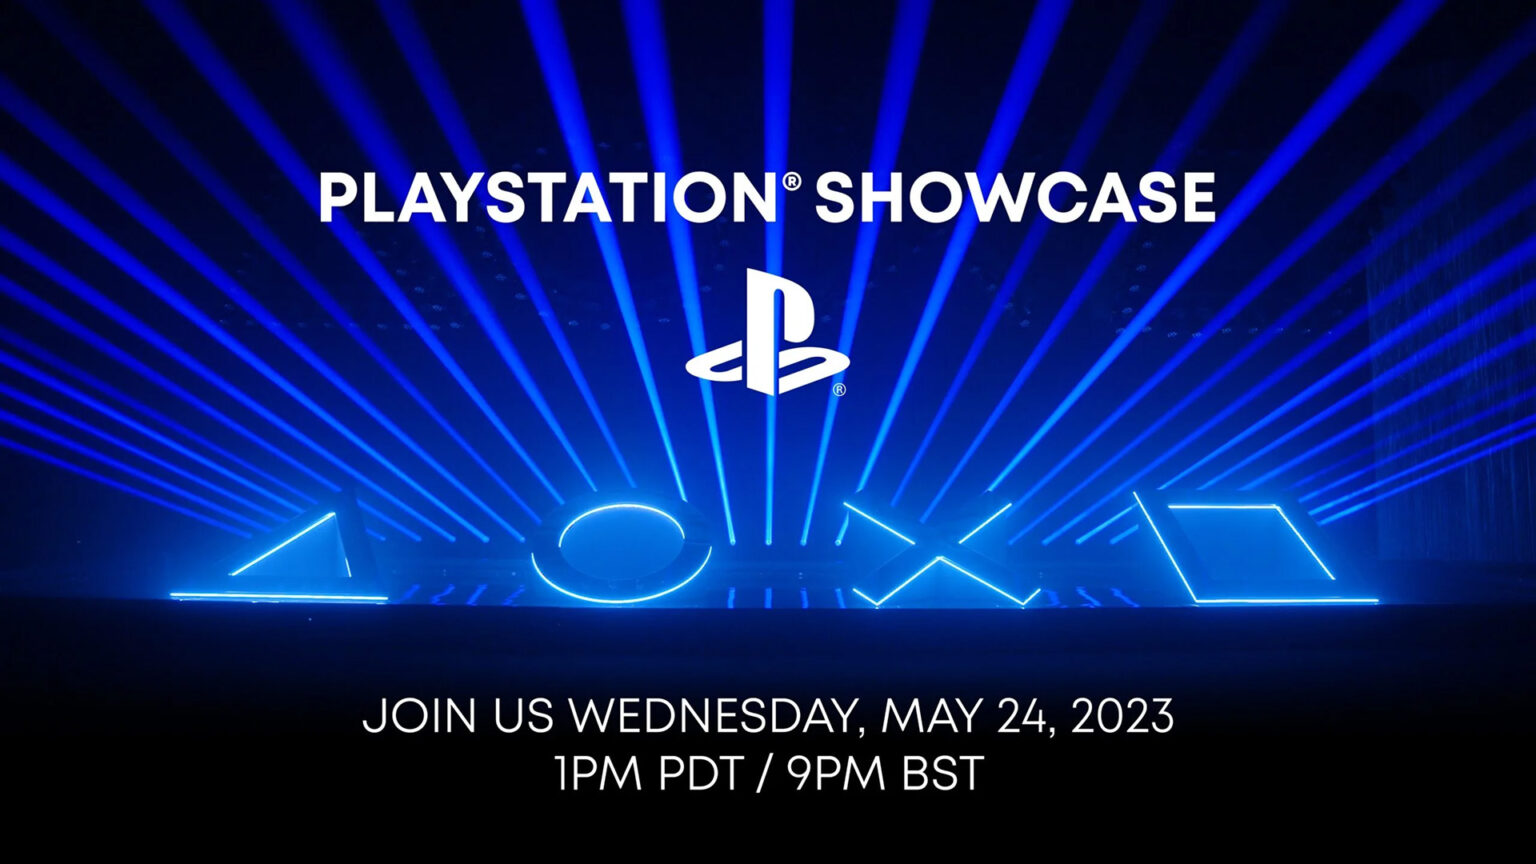 There's a PlayStation Showcase May 24 FullCleared